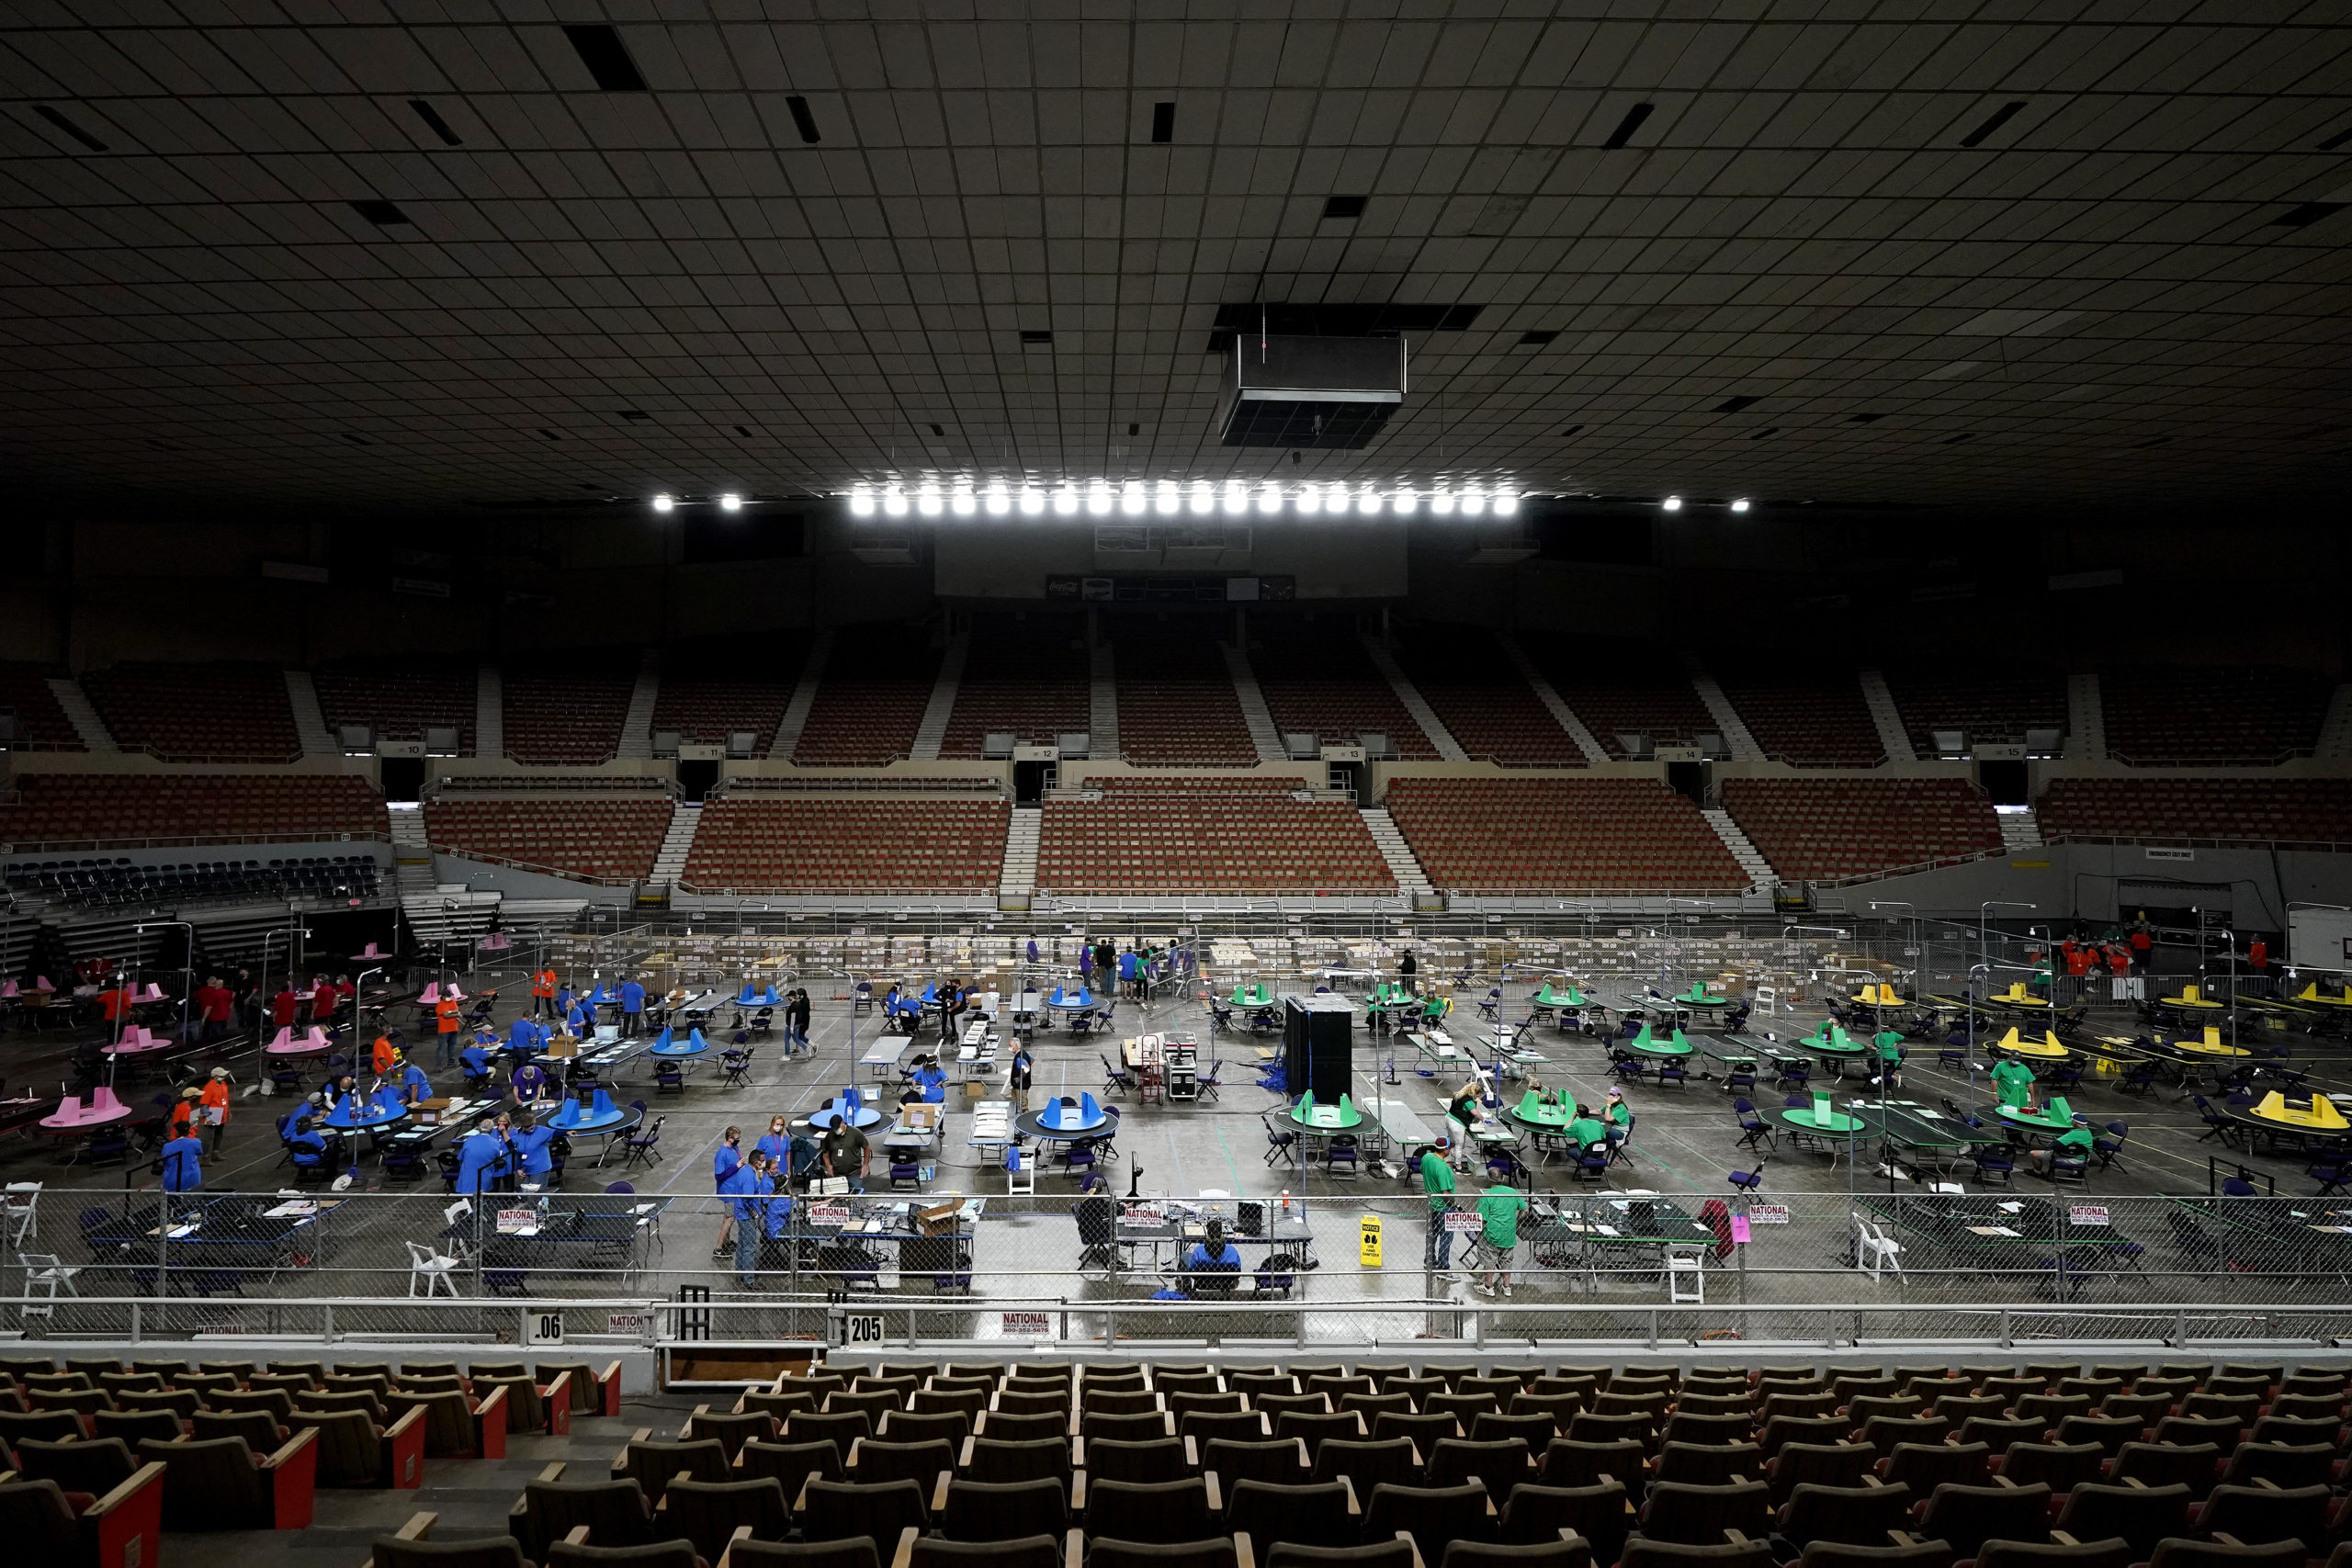 Maricopa County ballots cast in the 2020 general election are examined and recounted by contractors working for Florida-based company, Cyber Ninjas, May 6, 2021, at Veterans Memorial Coliseum in Phoenix